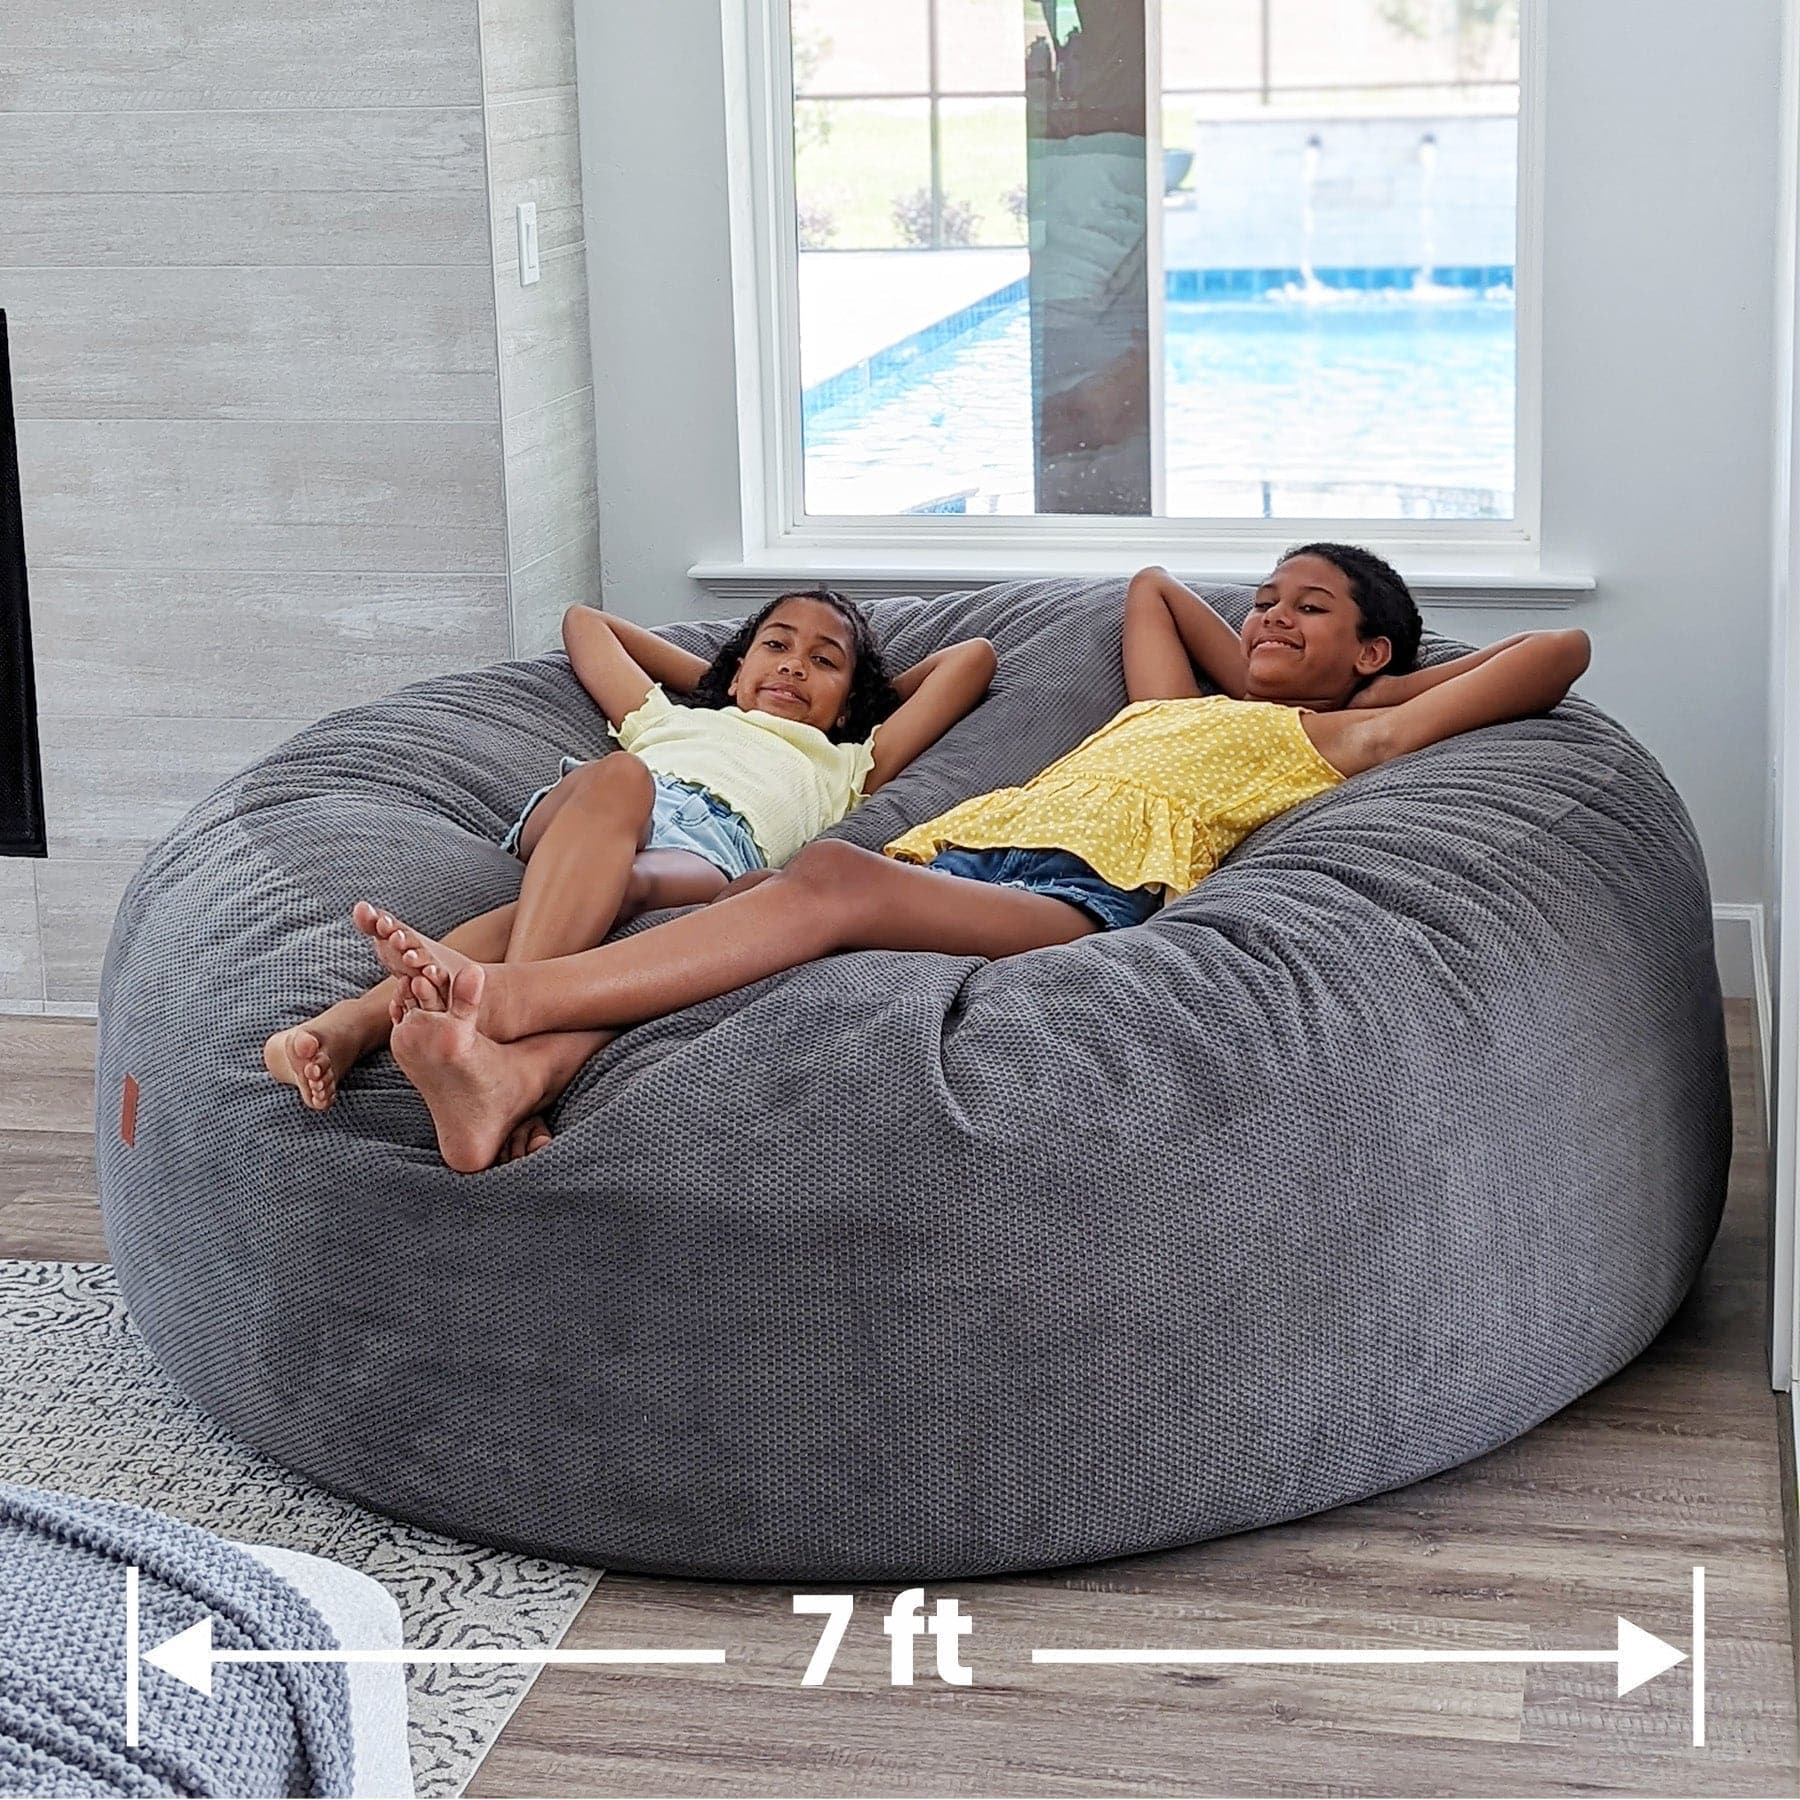 7ft Giant Bean Bag Chair Sofa Bed Pouf Cover No Stuffed Filler Big